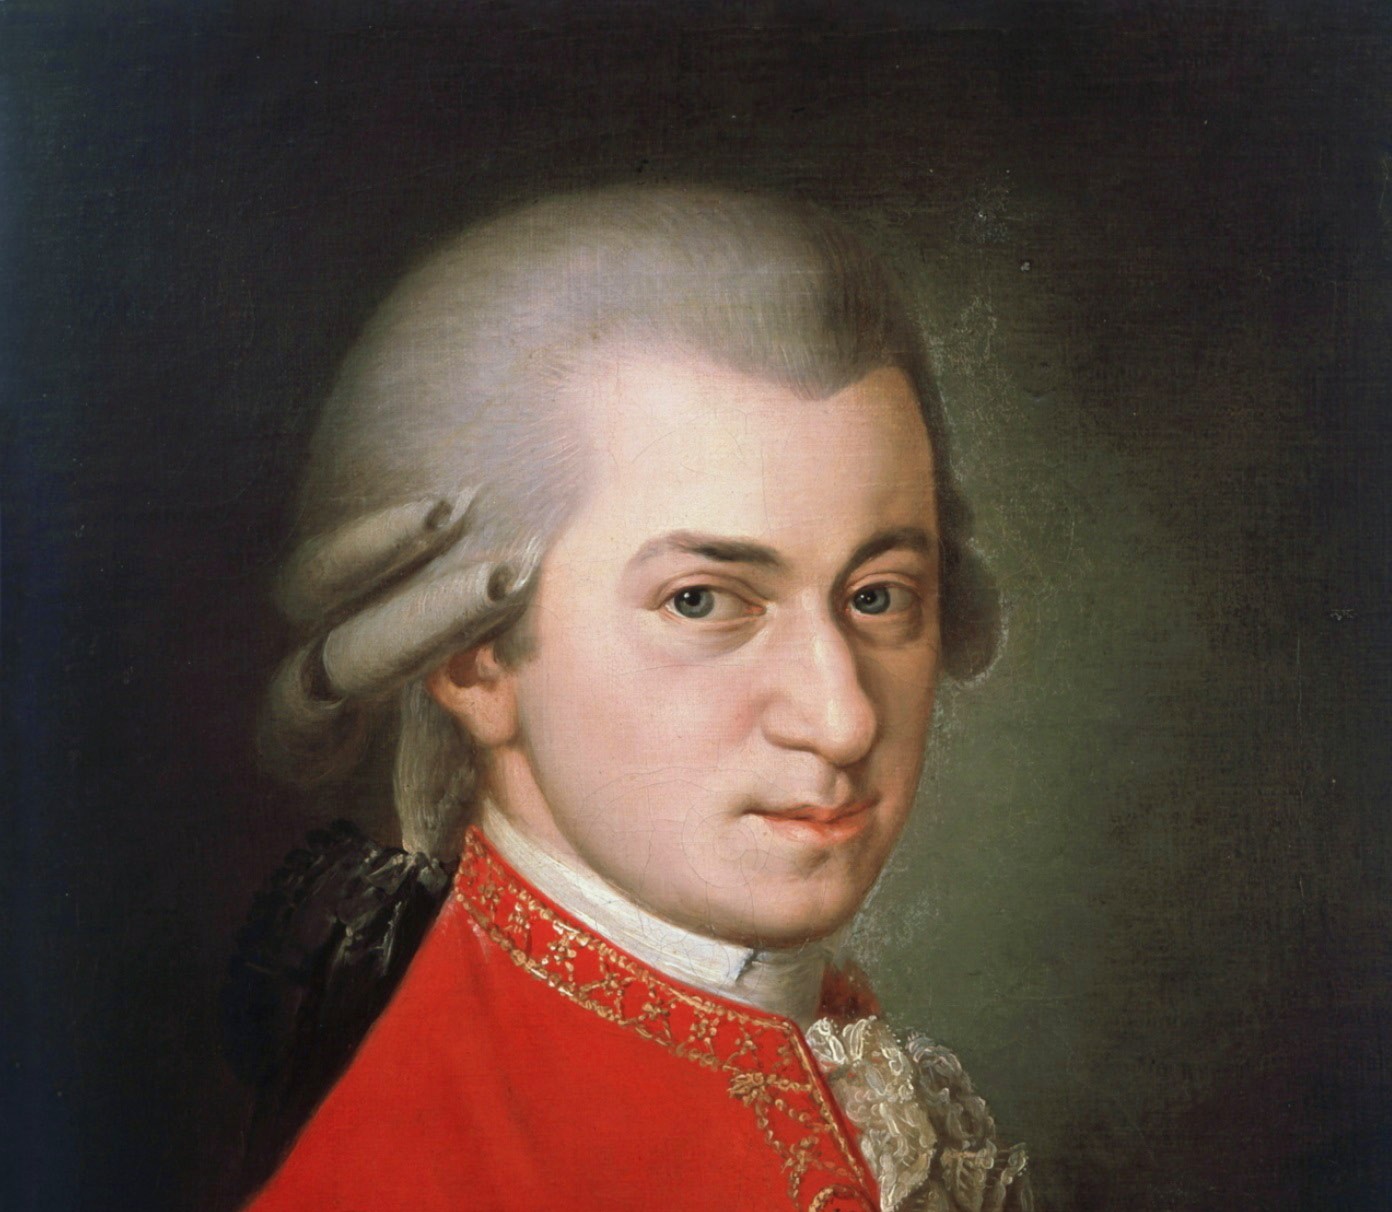 Old Mozart and the new past